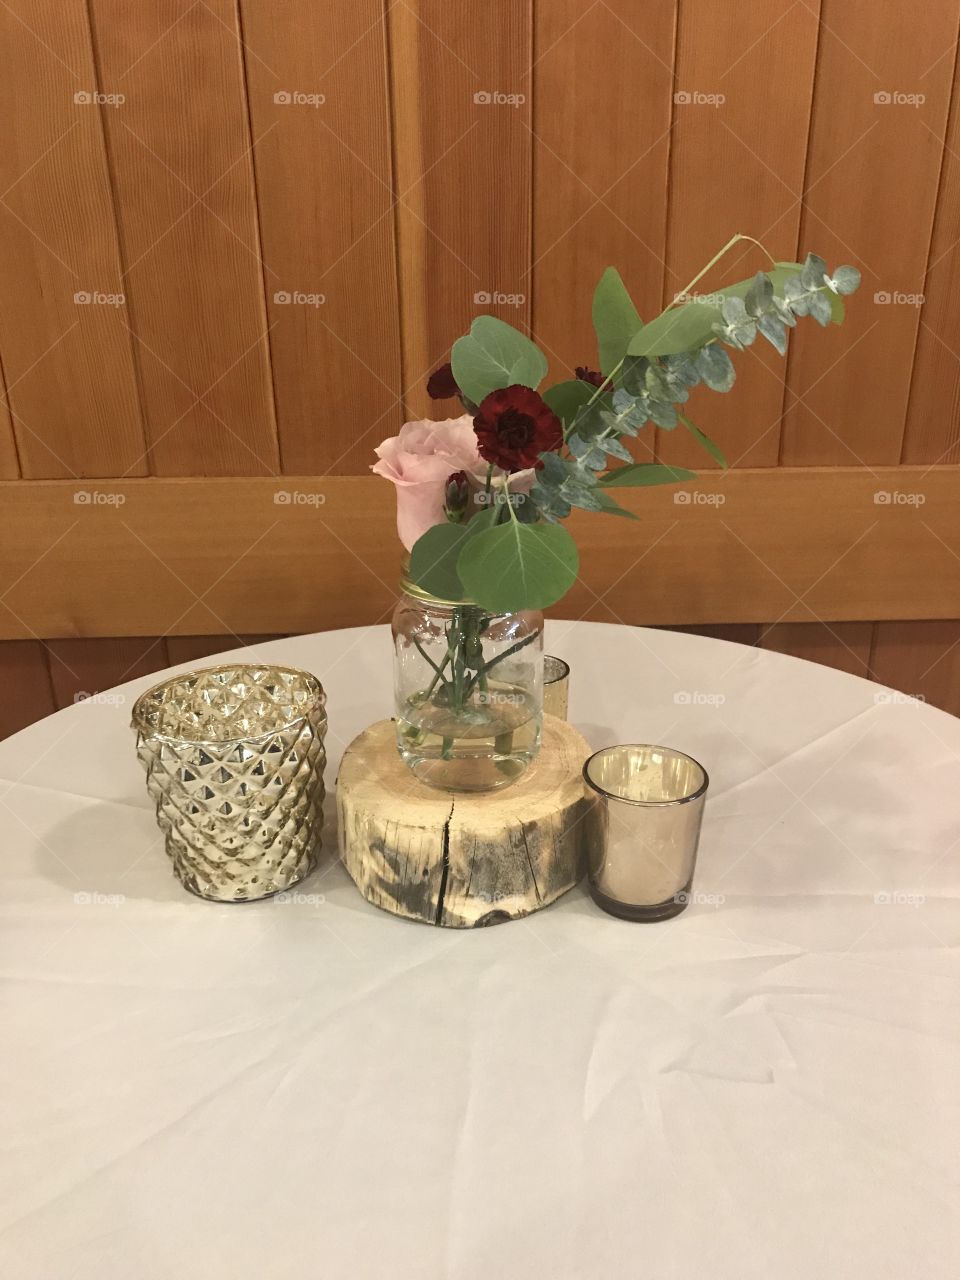 Photo taken at a rustic wedding. This table topper features a pink roses and other plants. Tea light candles set the mood to say I do 